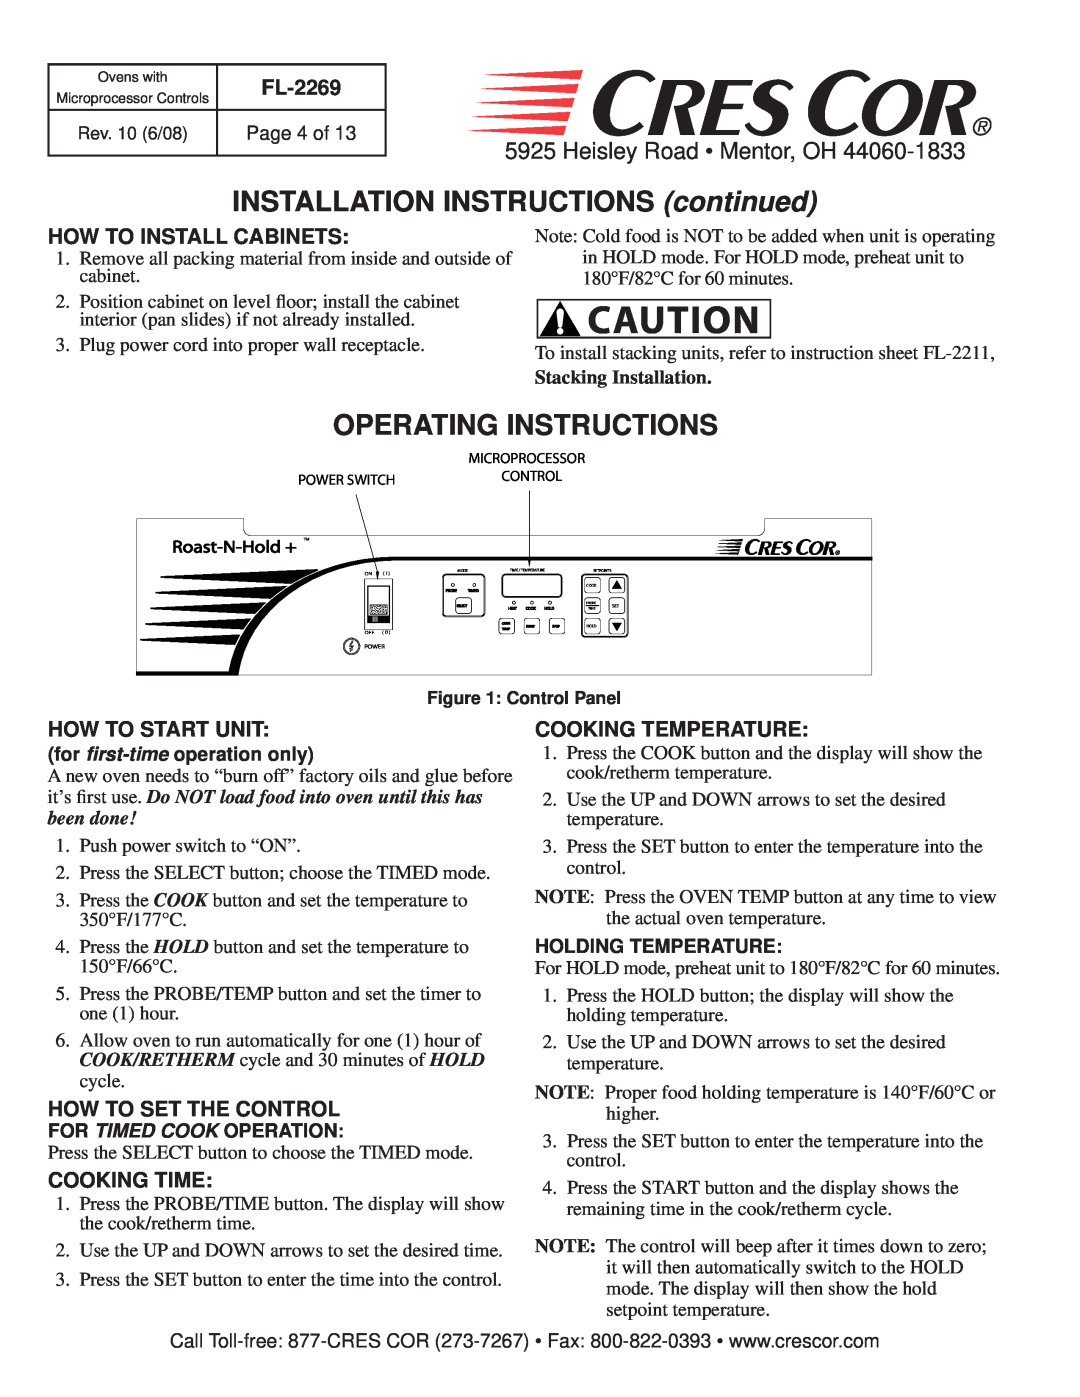 Cres Cor CO151HUA6B-Q1 manual INSTALLATION INSTRUCTIONS continued, Operating Instructions, Heisley Road Mentor, OH, FL-2269 